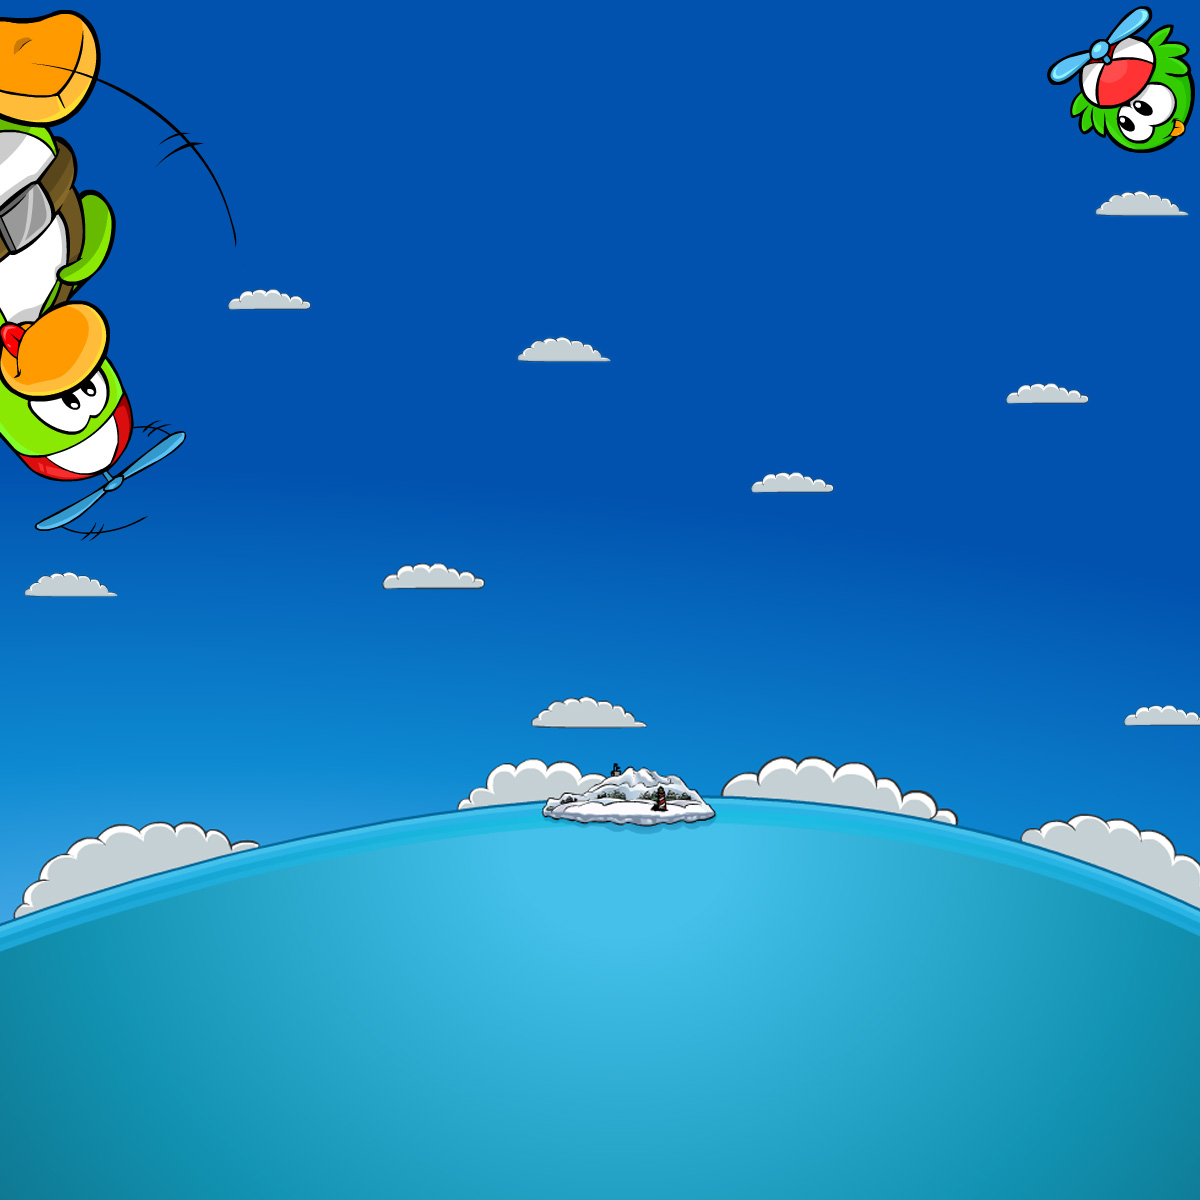 Club Penguin Wallpaper From Disneycouk . Club Penguin Wallpapers ...